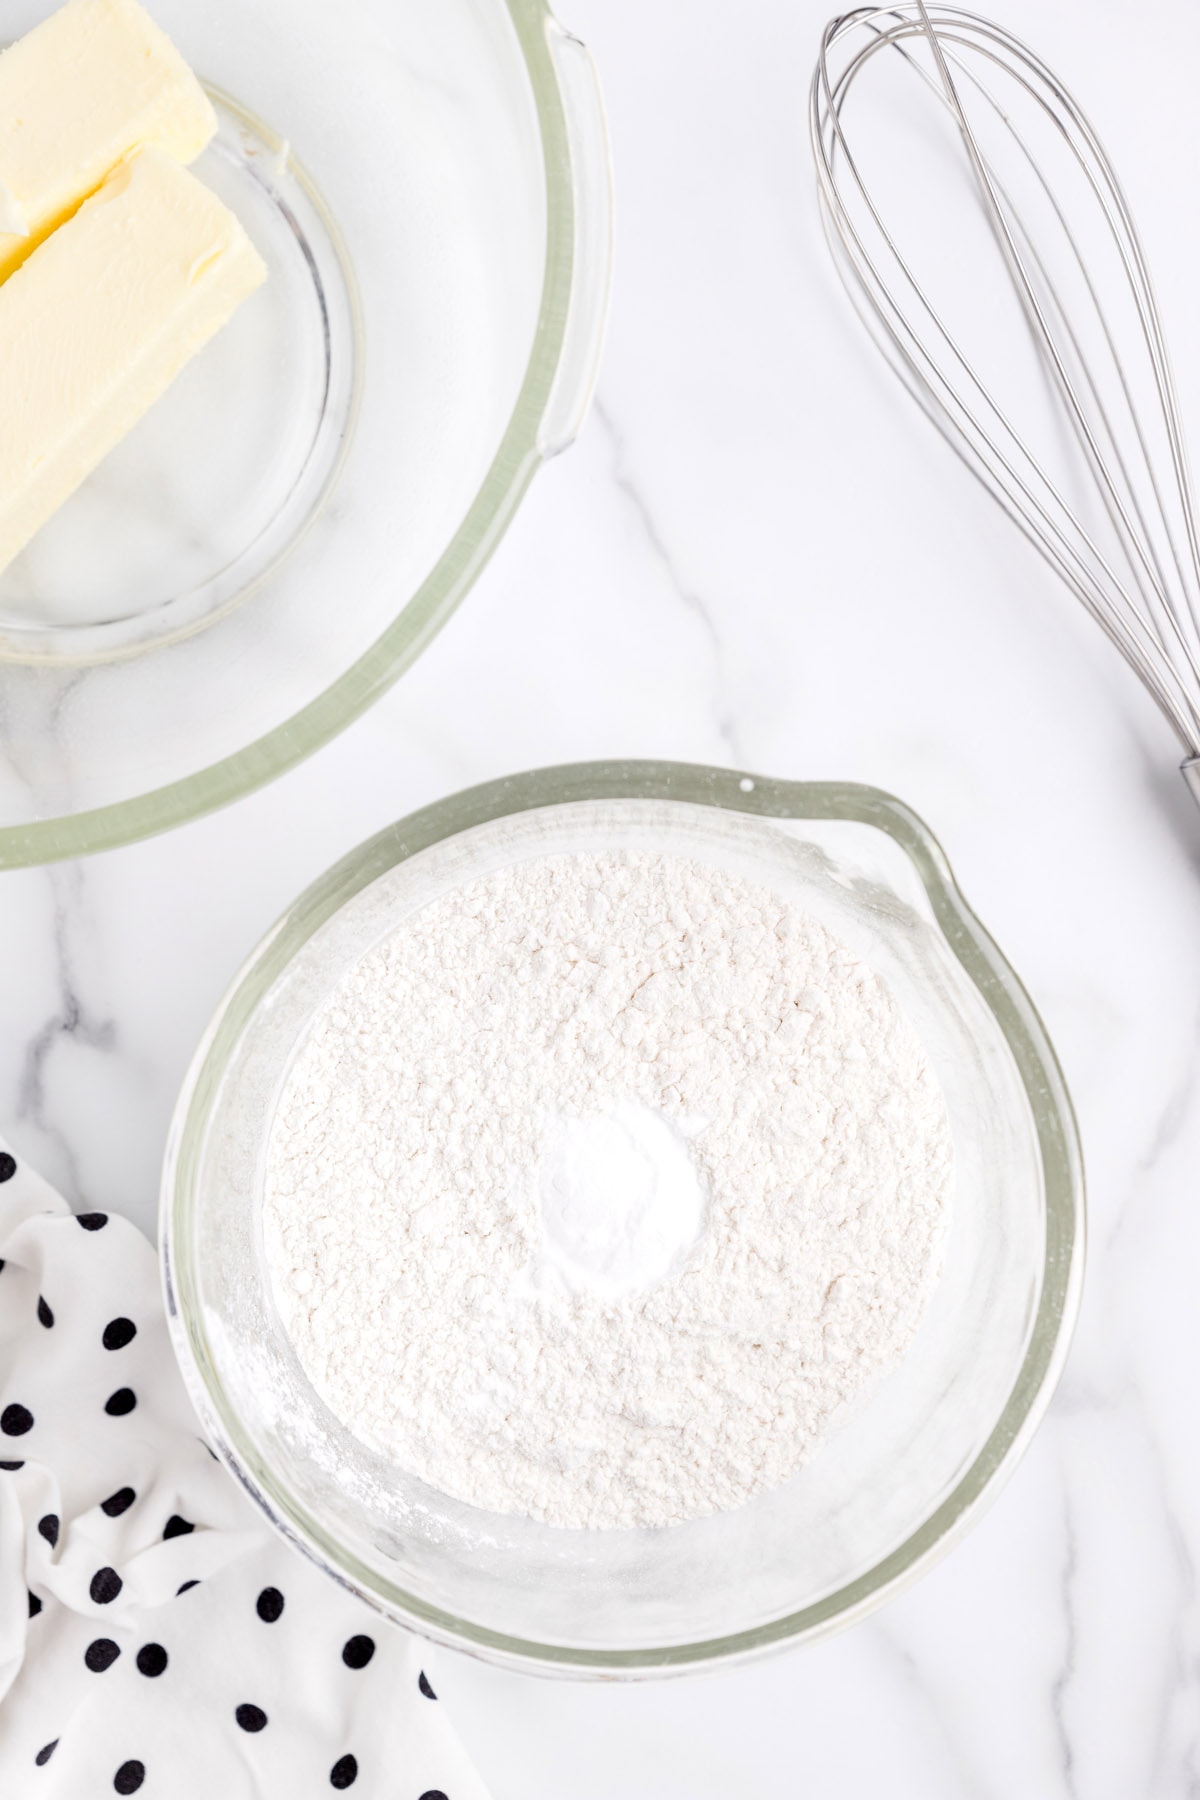 Whisk together all-purpose flour and baking soda